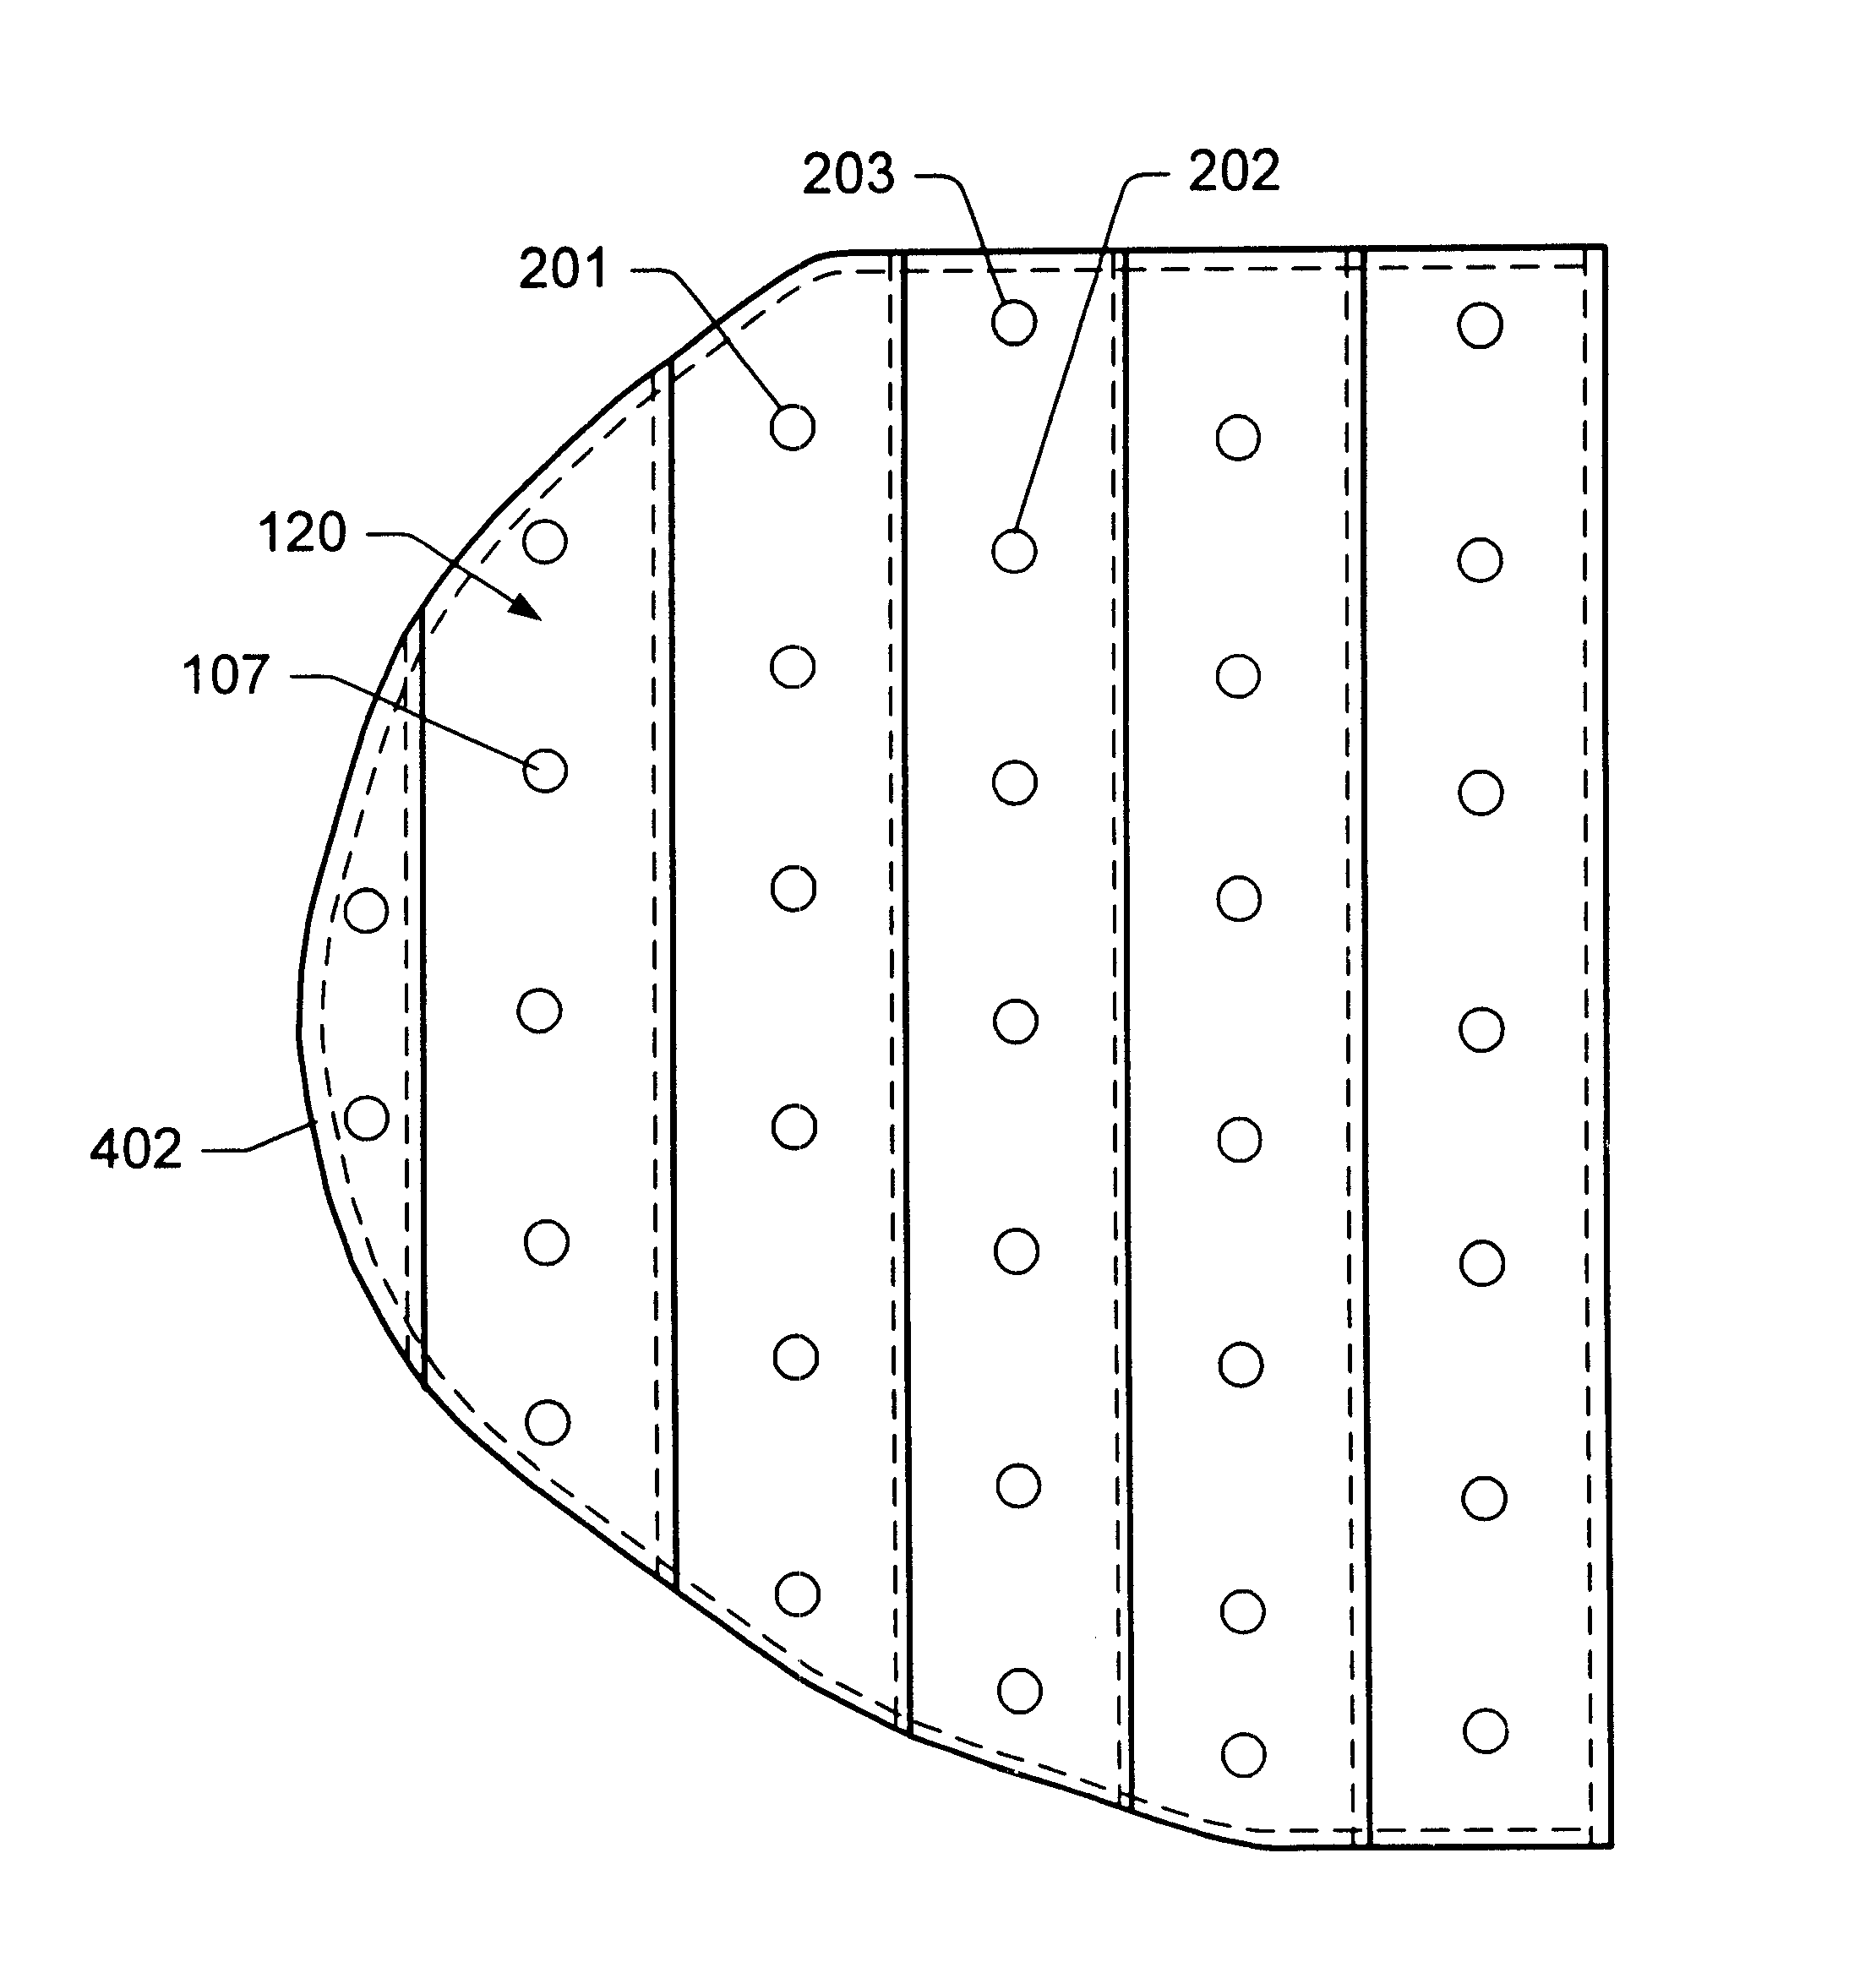 Method for remediating near-surface contaminated soil